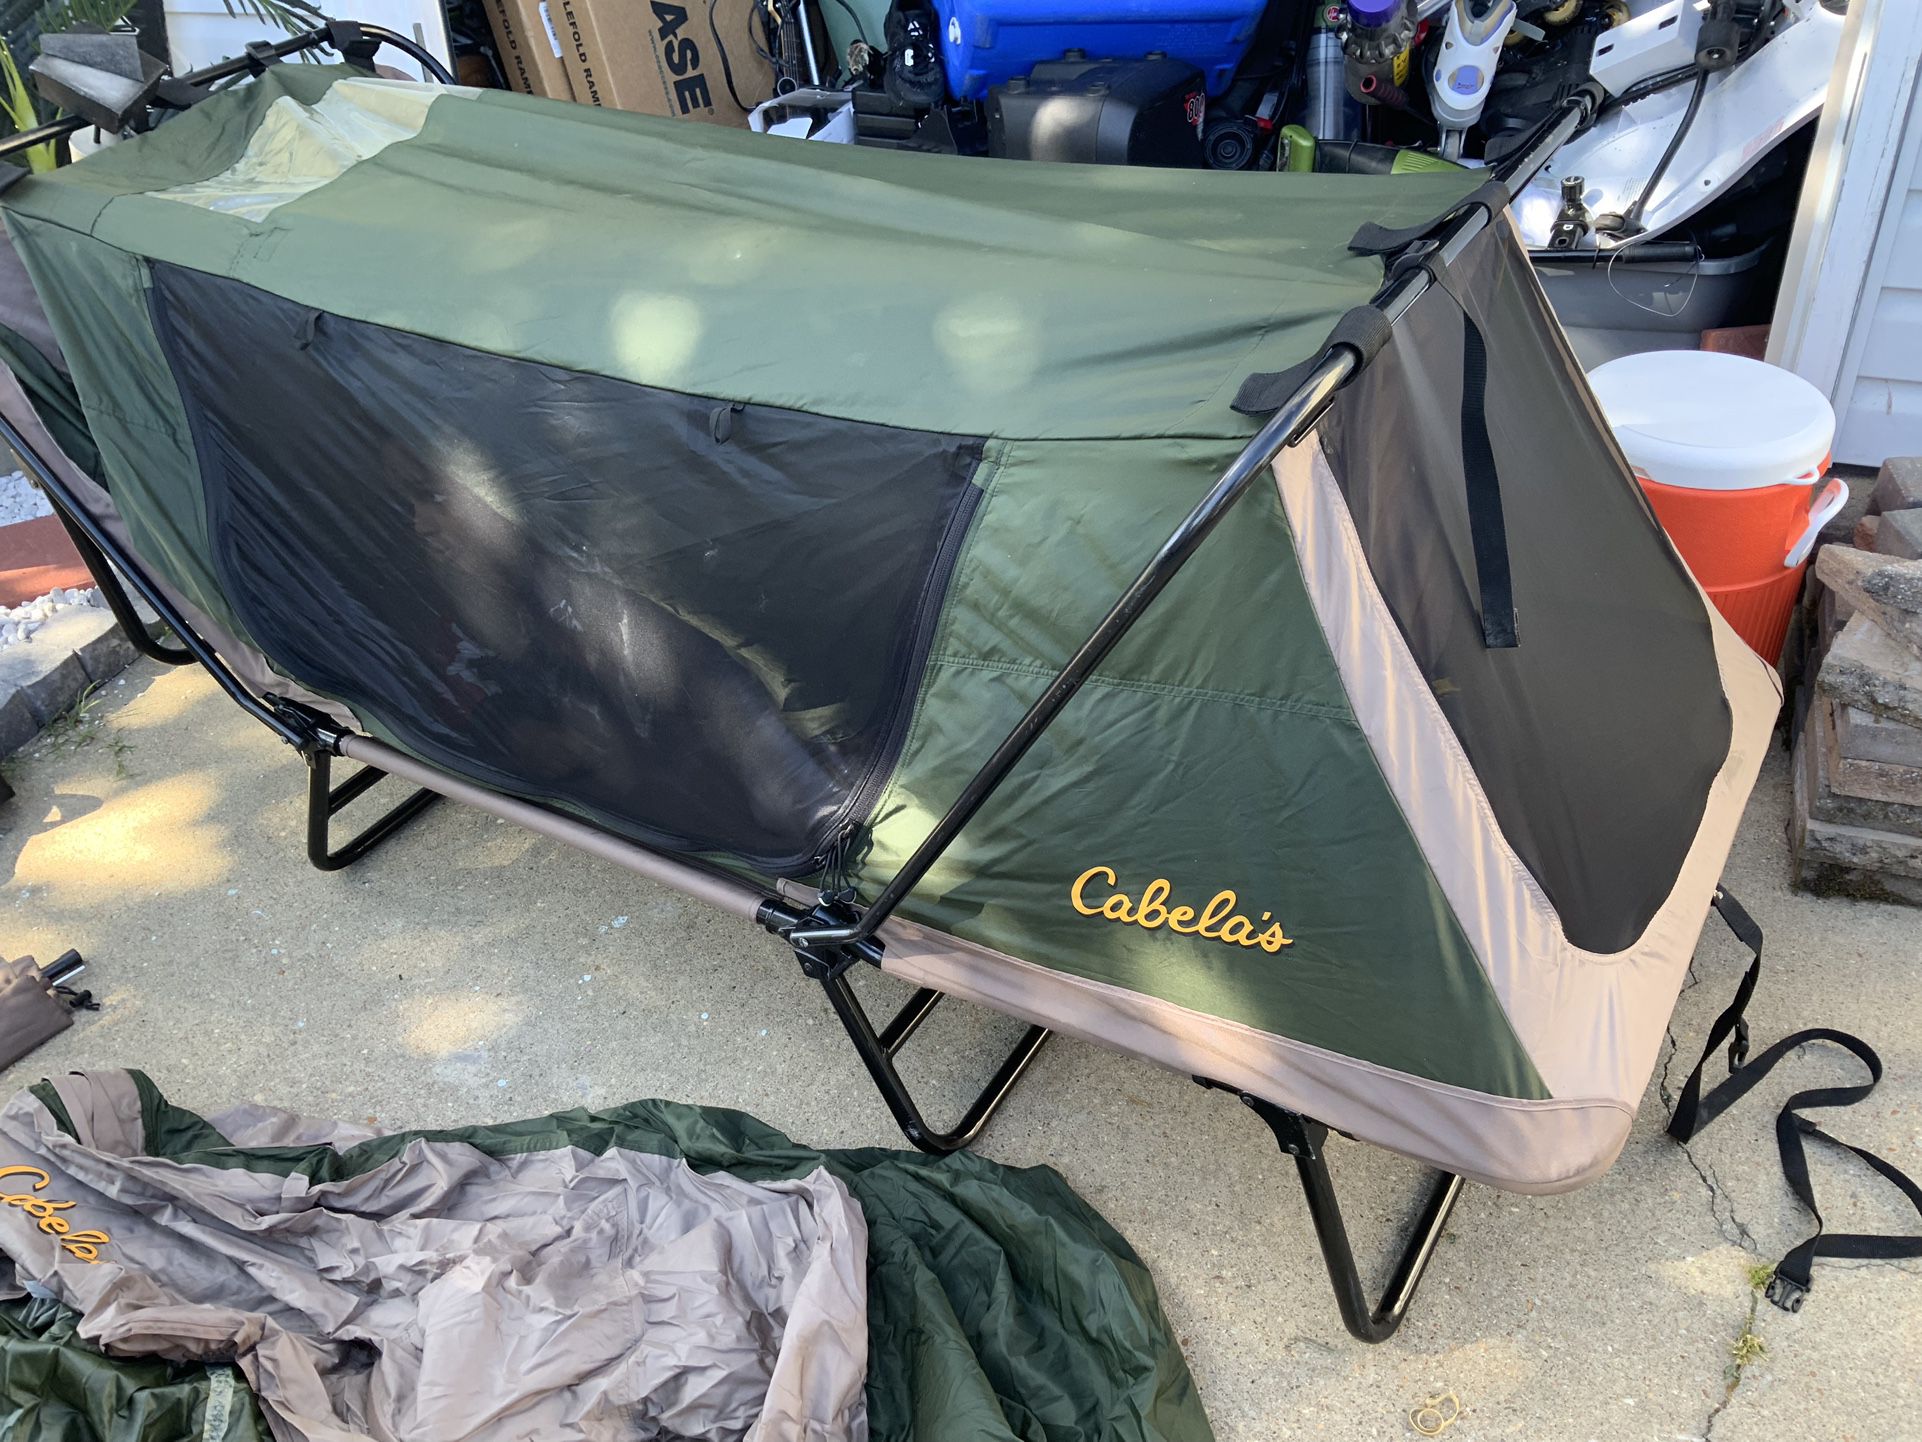 Cabela’s Camping Bed And Tent